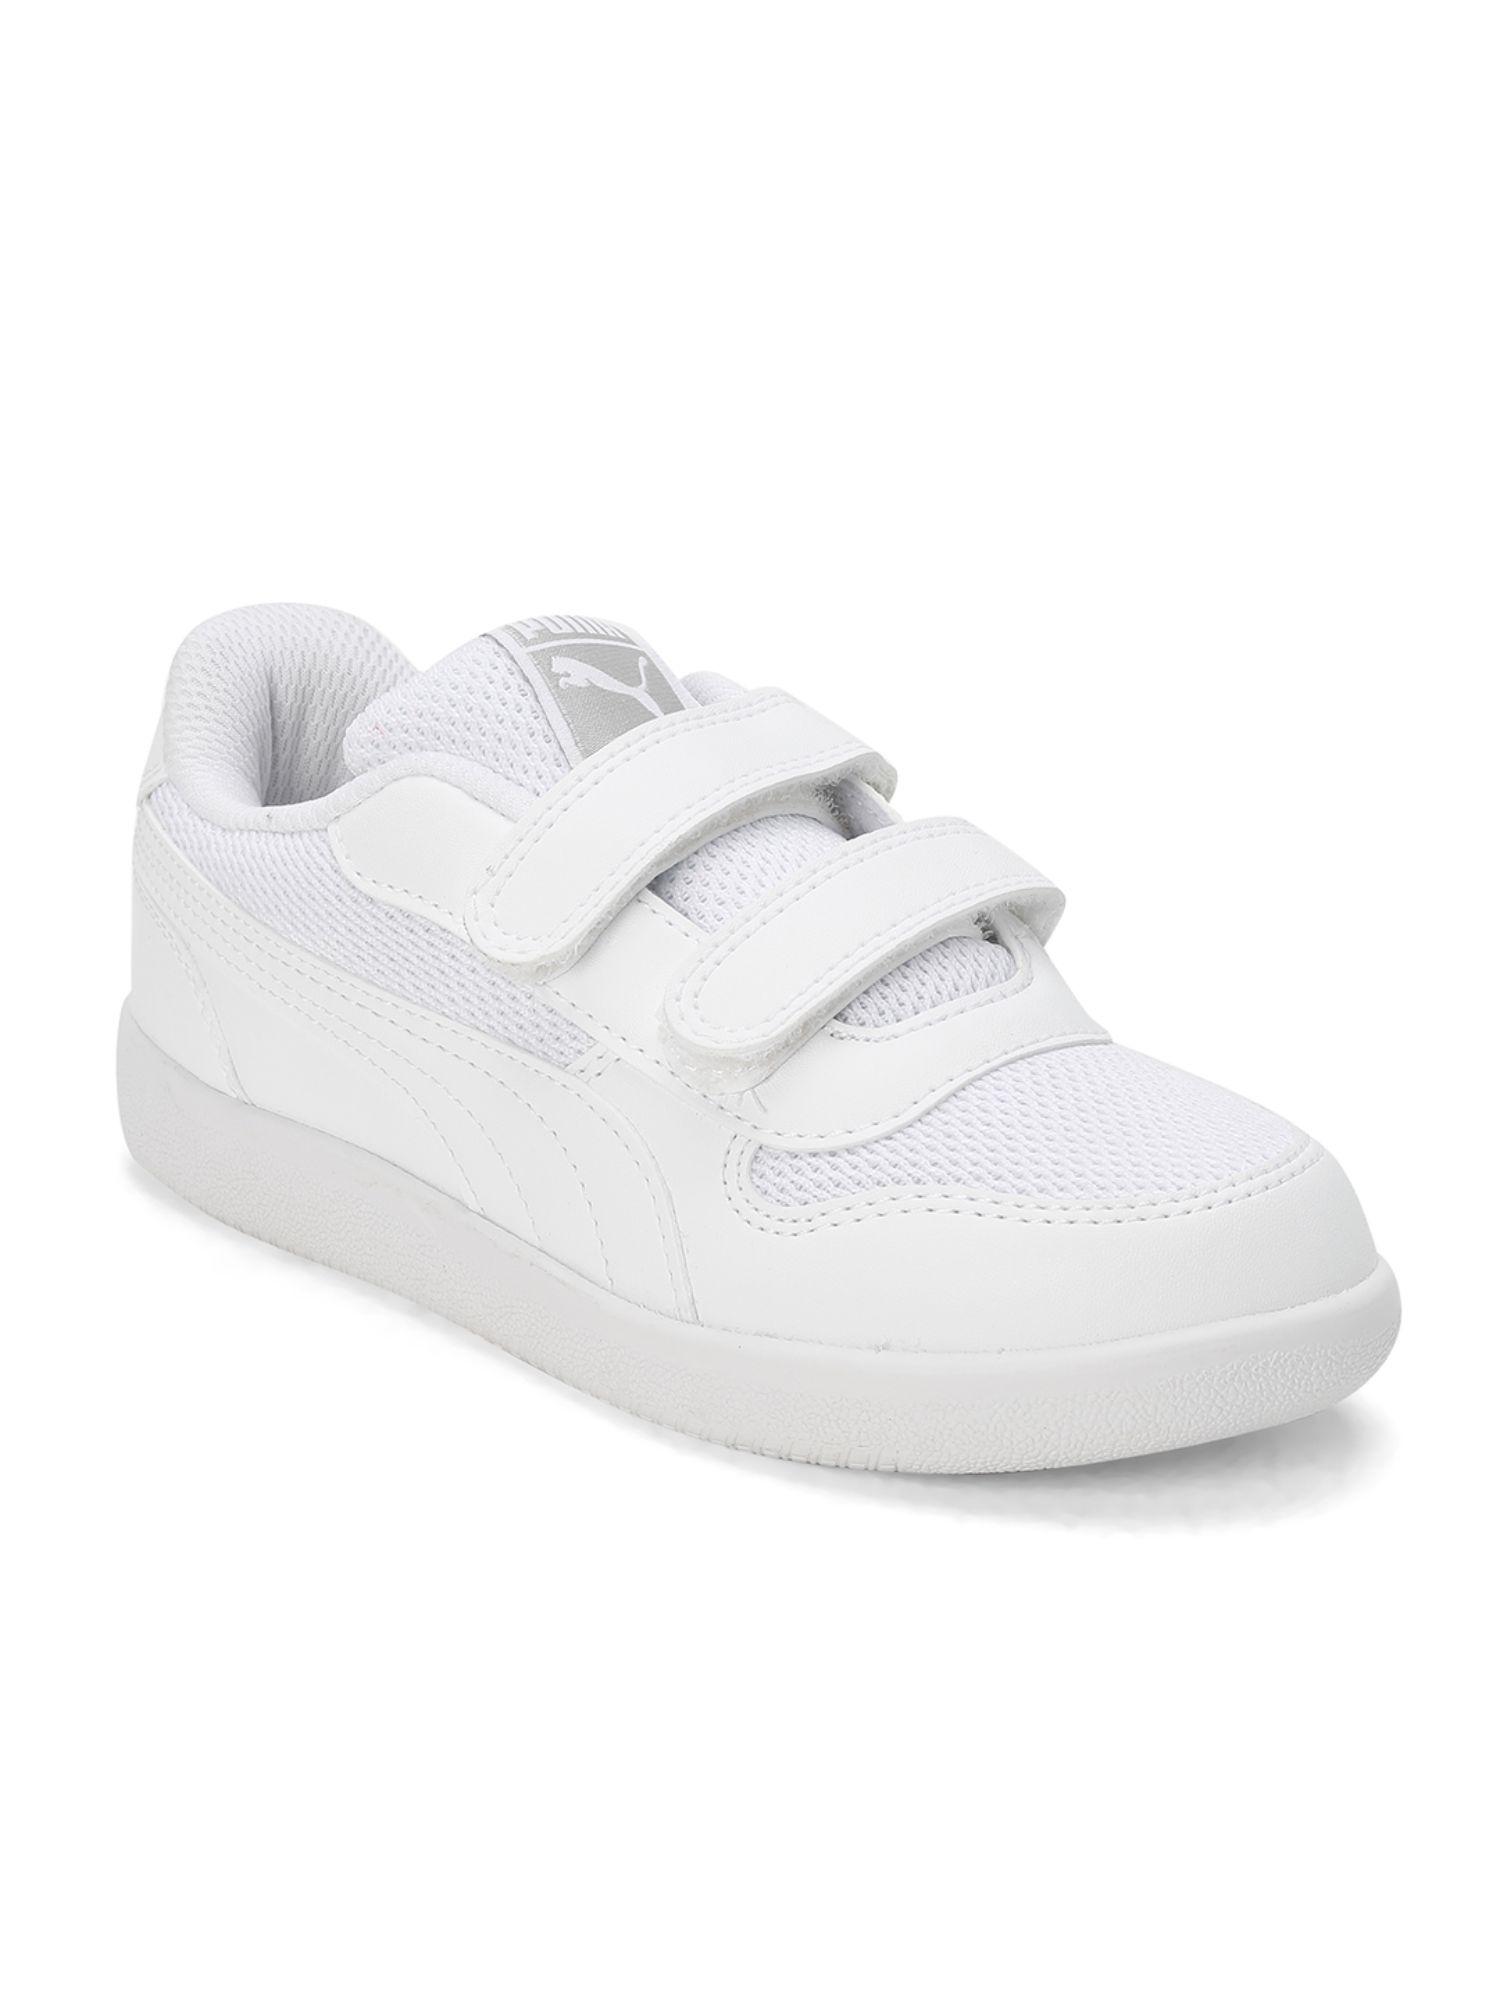 punch comfort preschool kids white casual shoes